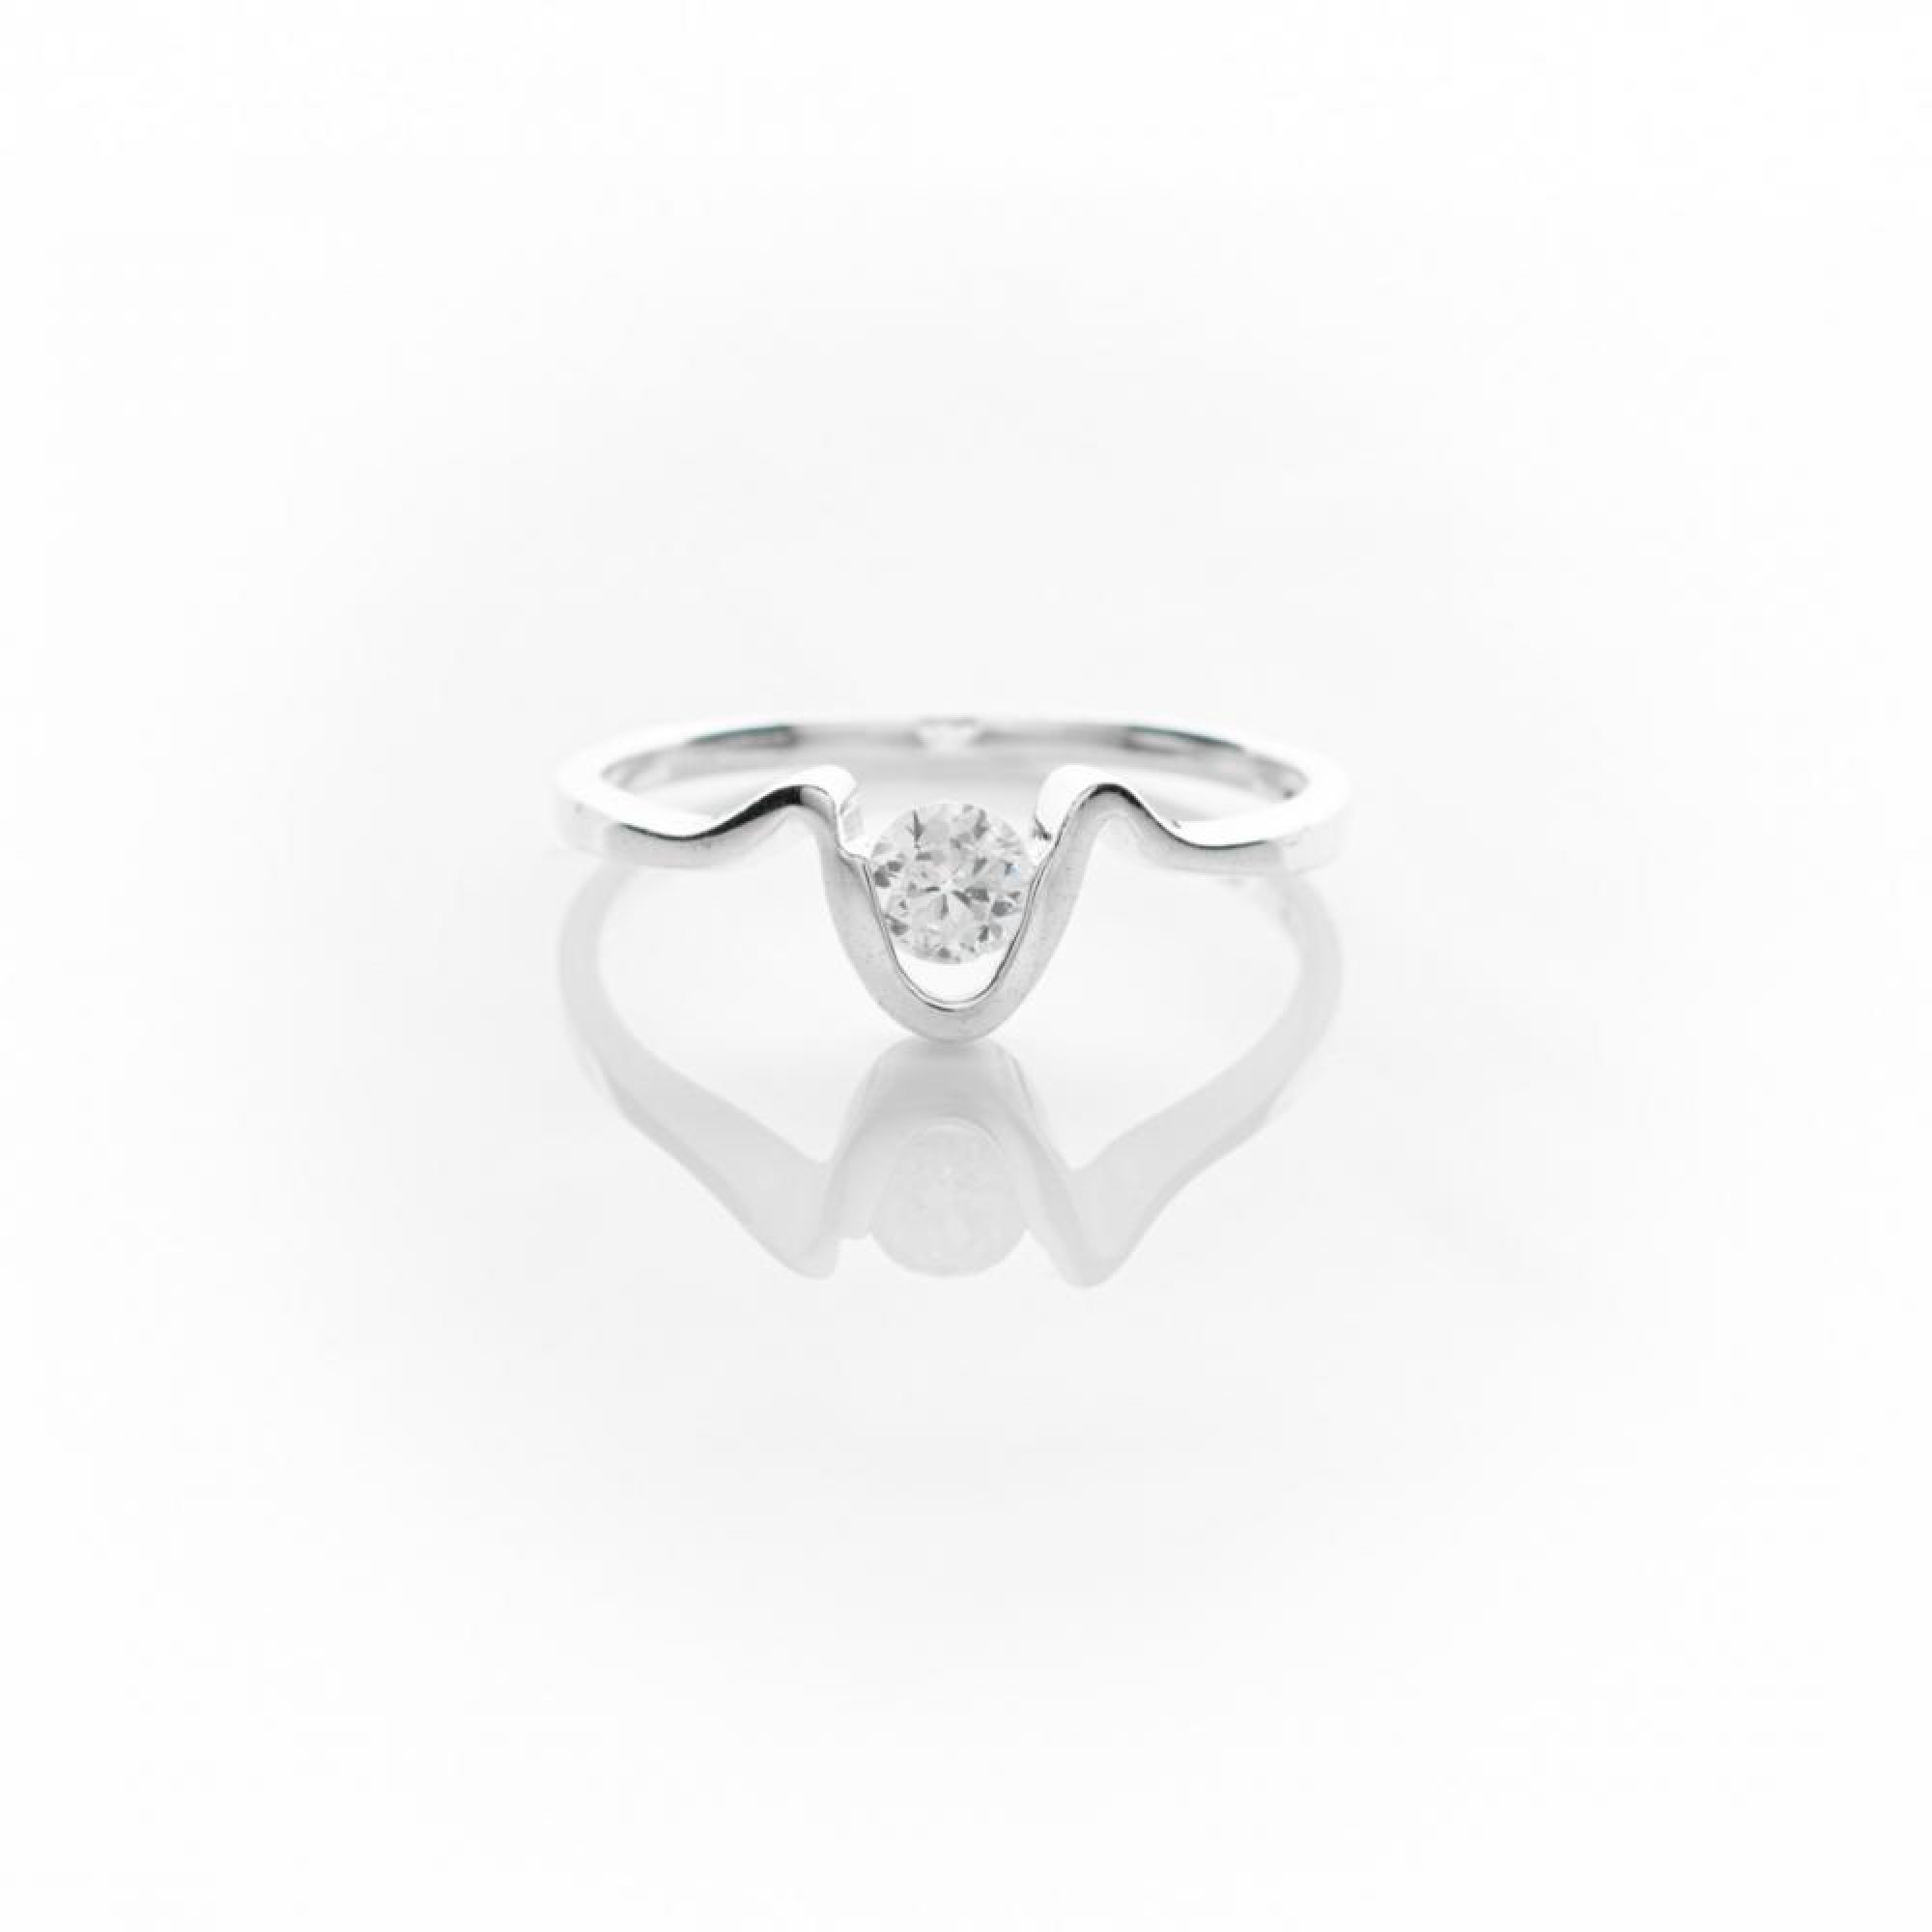 Silver ring with zircon stone